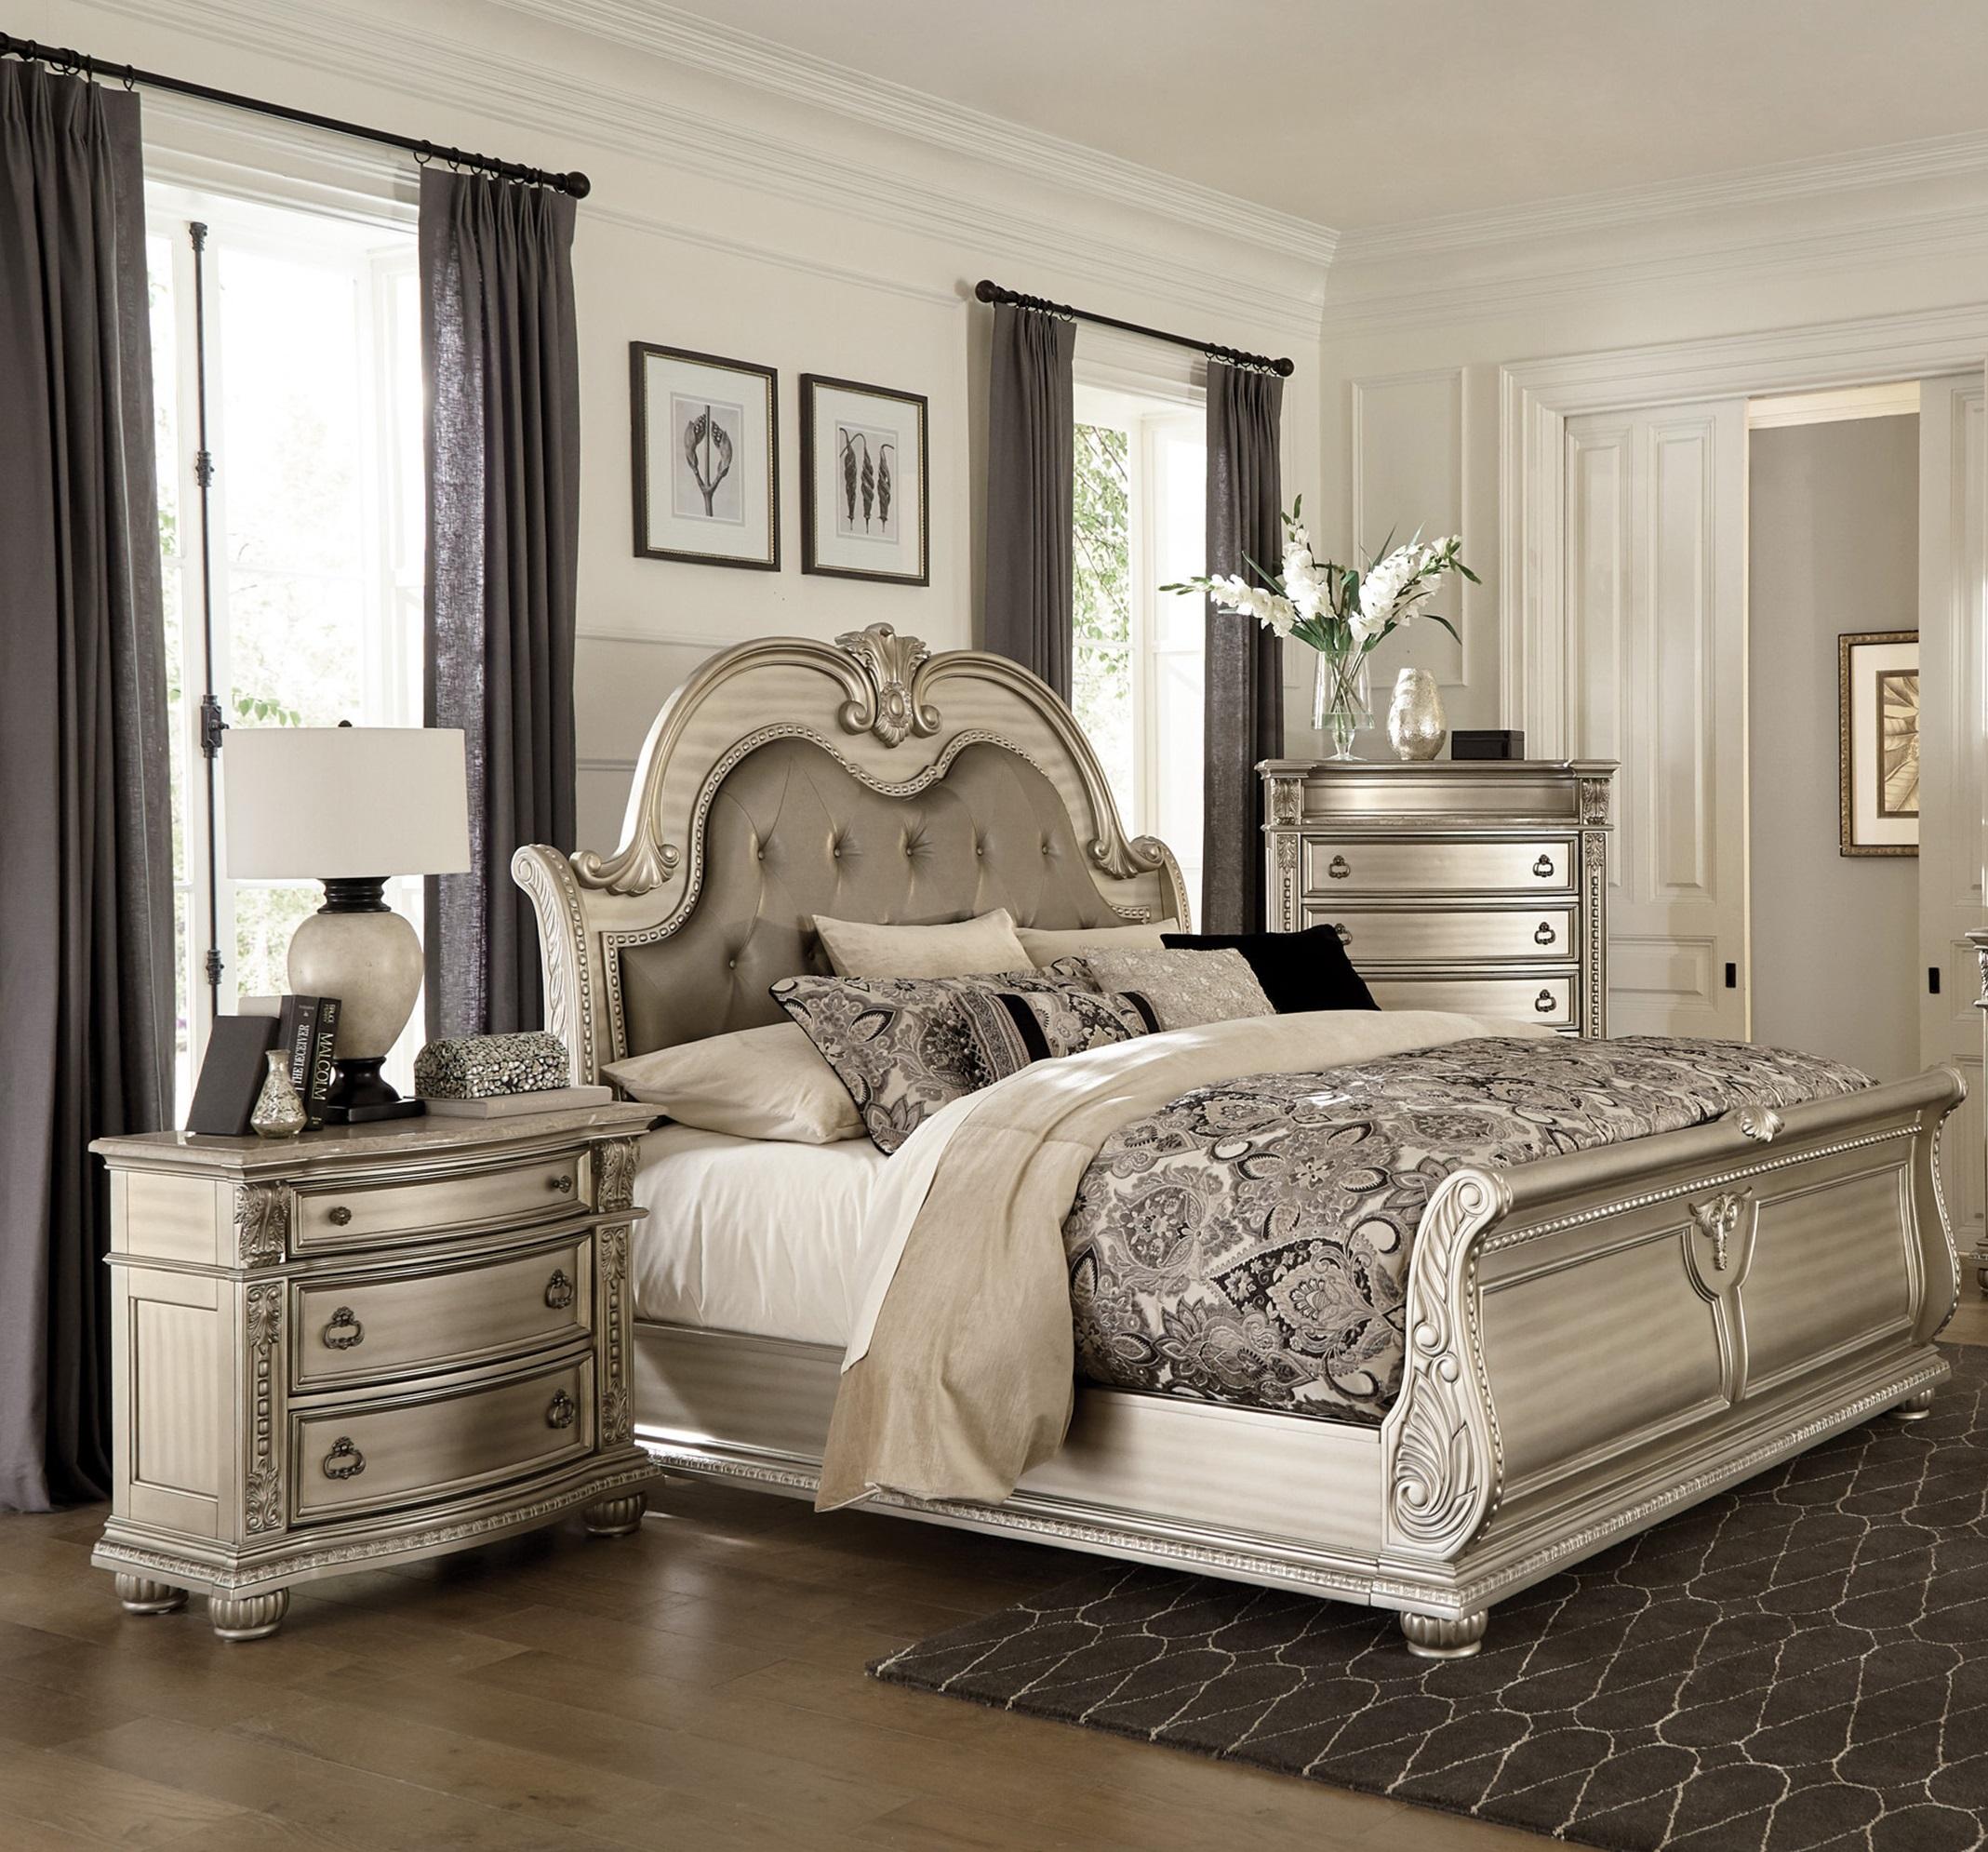 Classic Bedroom Set 1757SVK-1CK-3PC Cavalier 1757SVK-1CK-3PC in Silver Faux Leather